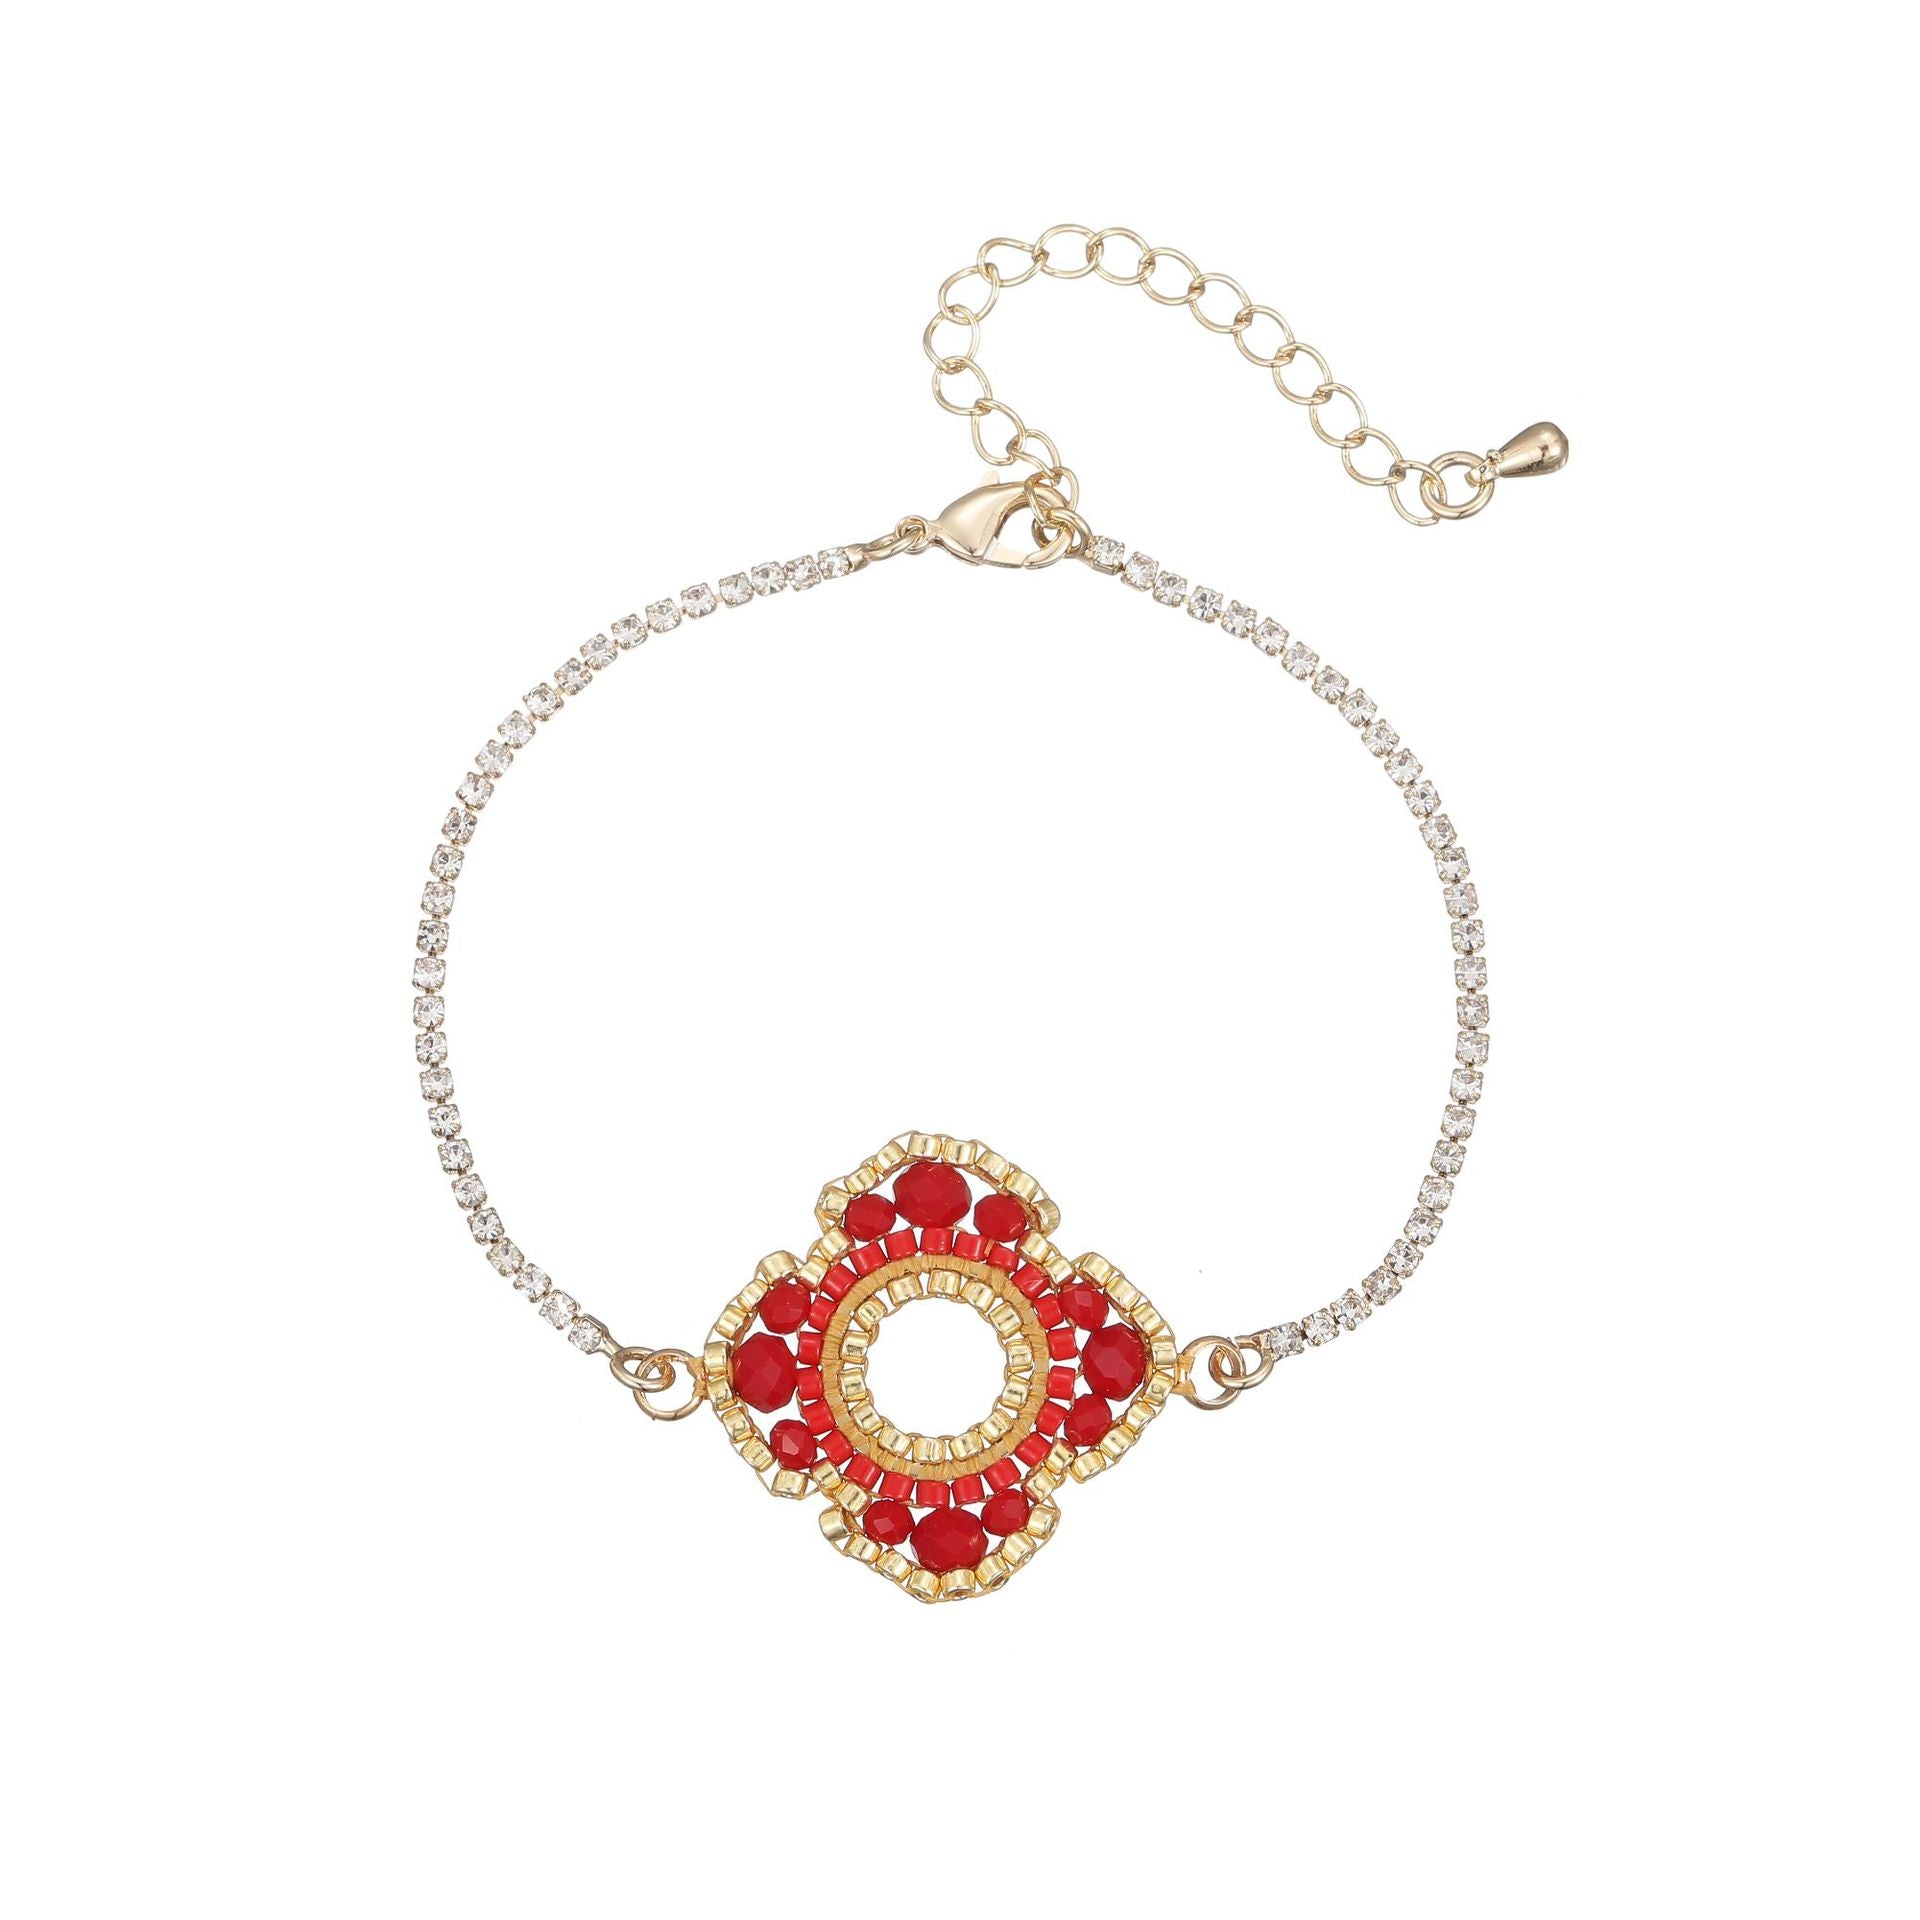 Unique Ethnic Style Creative Flower Design Woven Rice Bead and Rhinestone Bracelet  UponBasics Red  